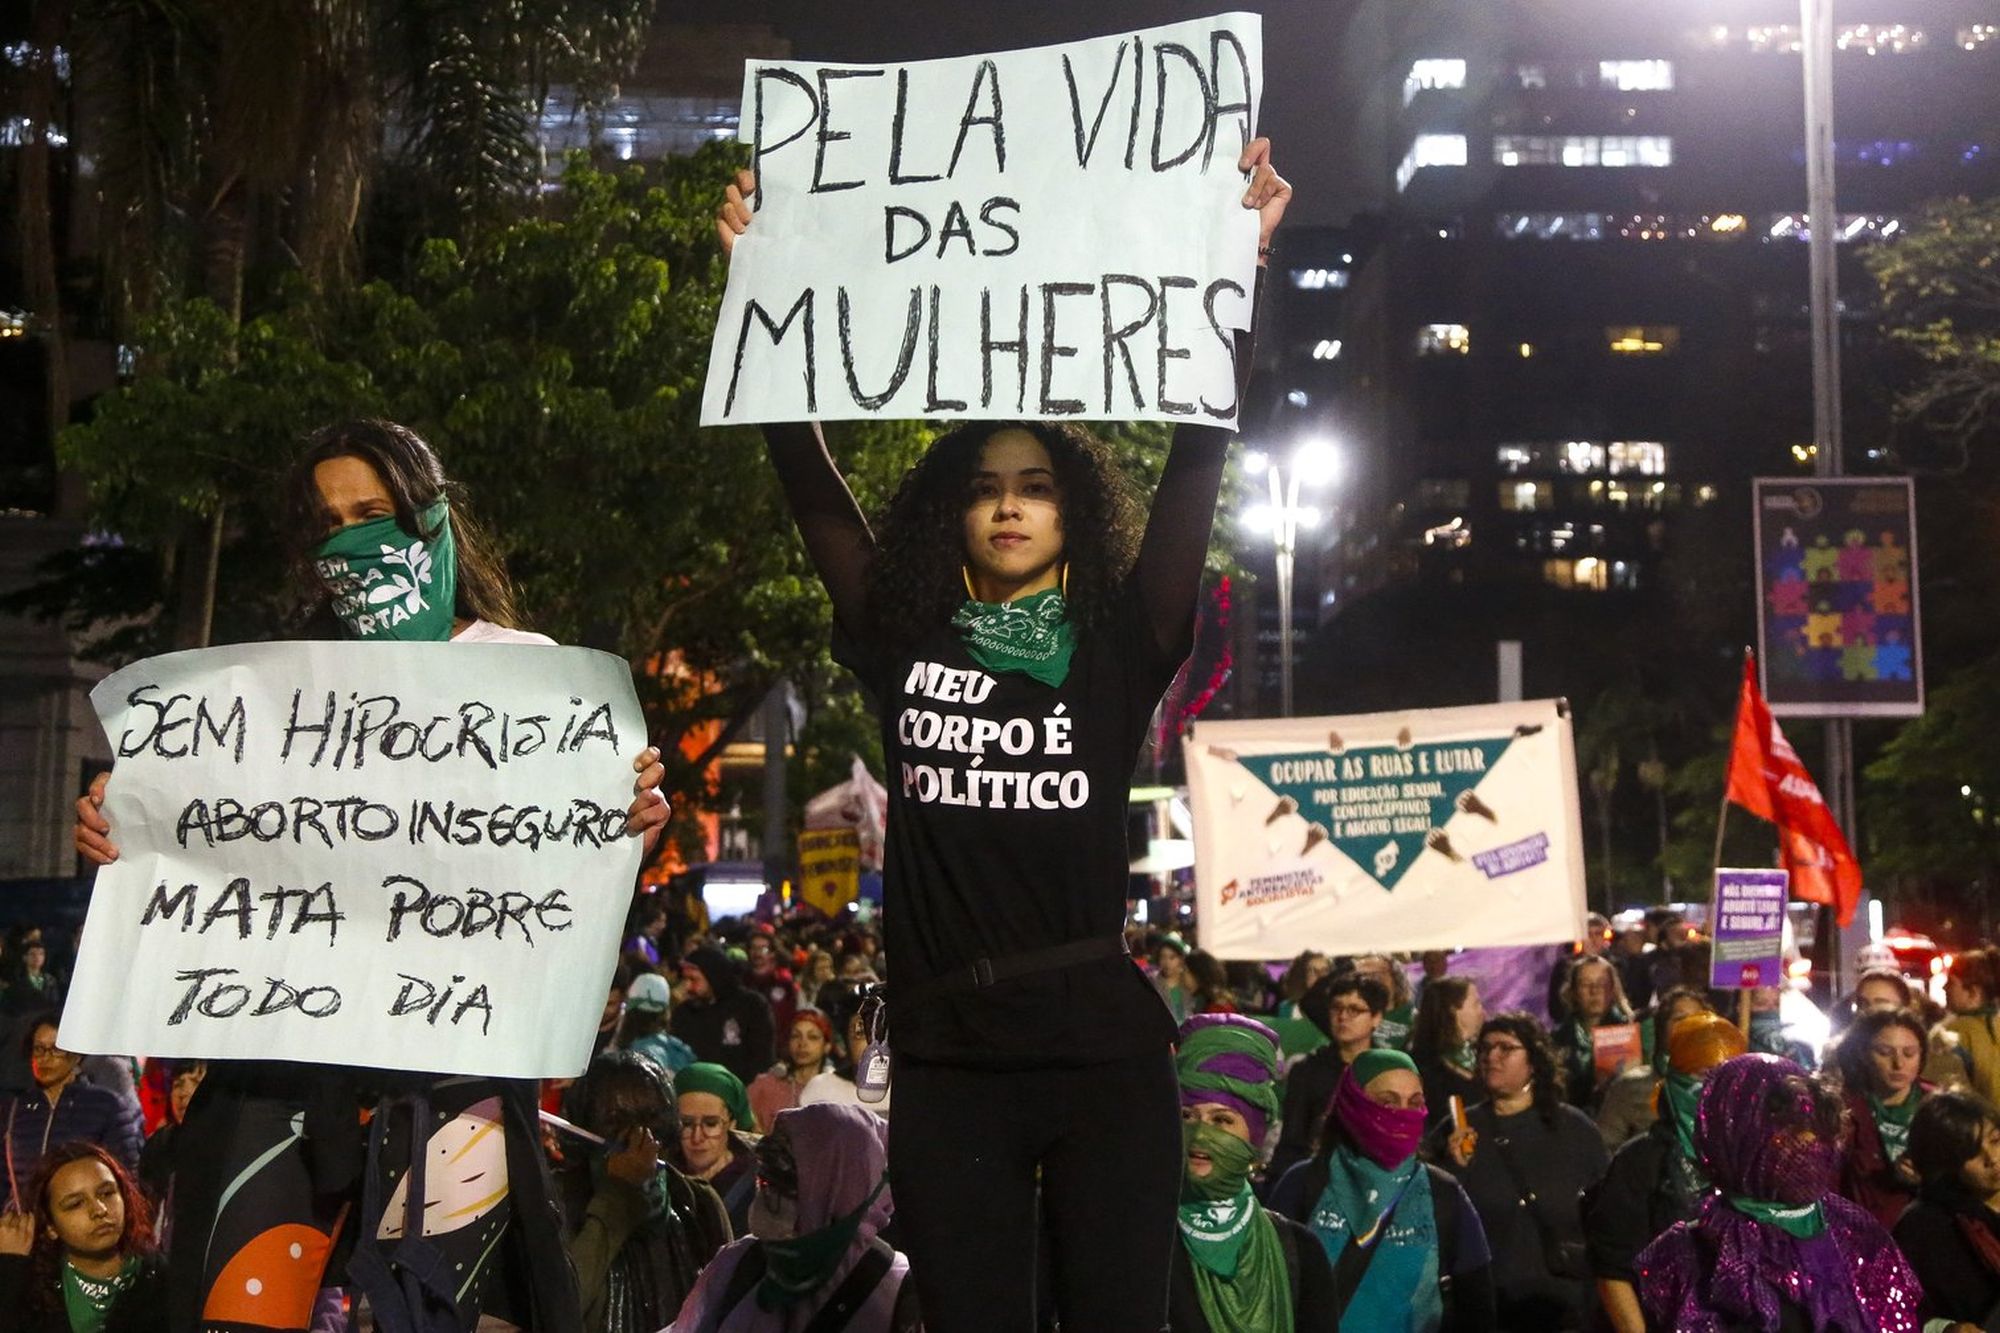 ‘No hypocrisy - unsafe abortion kills the poor every day’ and ‘For women’s lives’. Signs held in support of legal abortion during a march in São Paulo | MIGUEL SCHINCARIOL/AFP via Getty Images